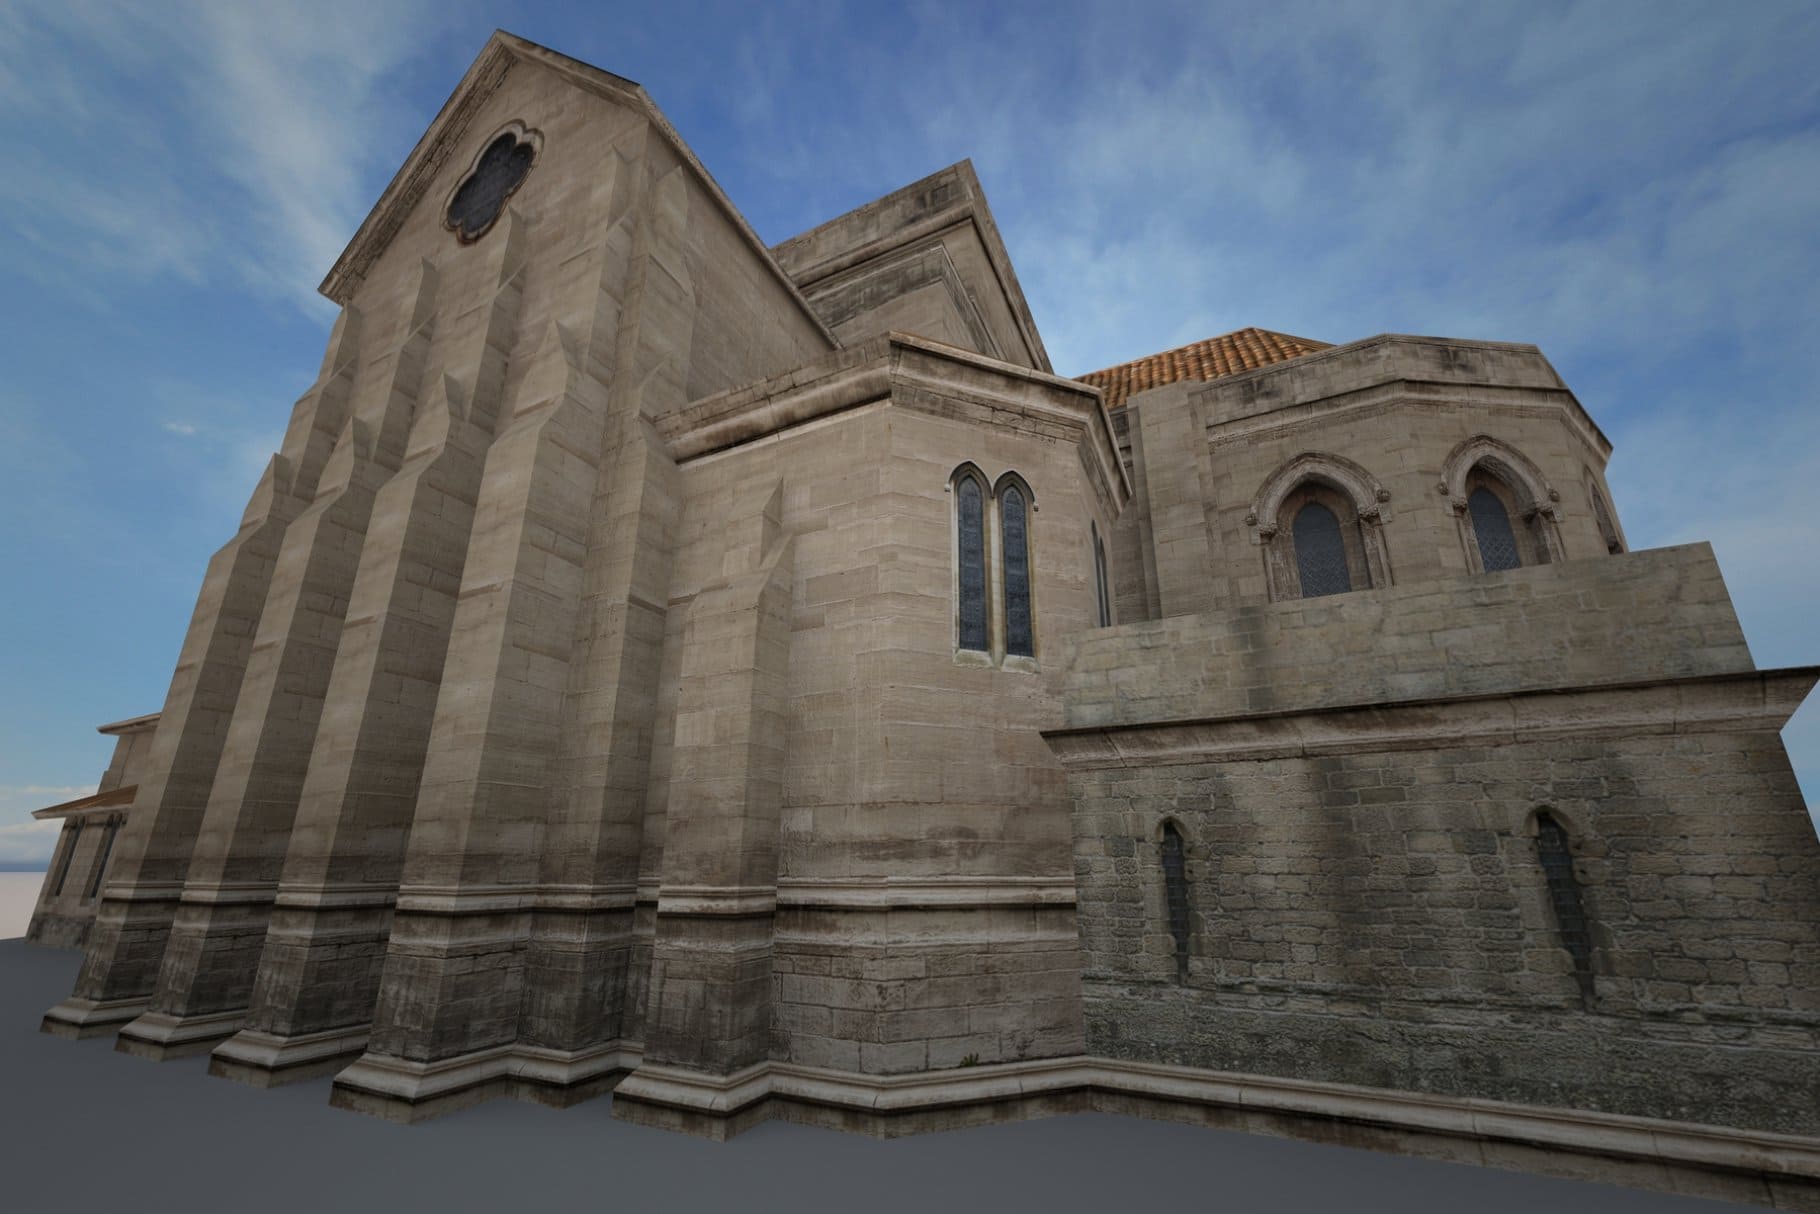 Realistic 3D model of the church building.